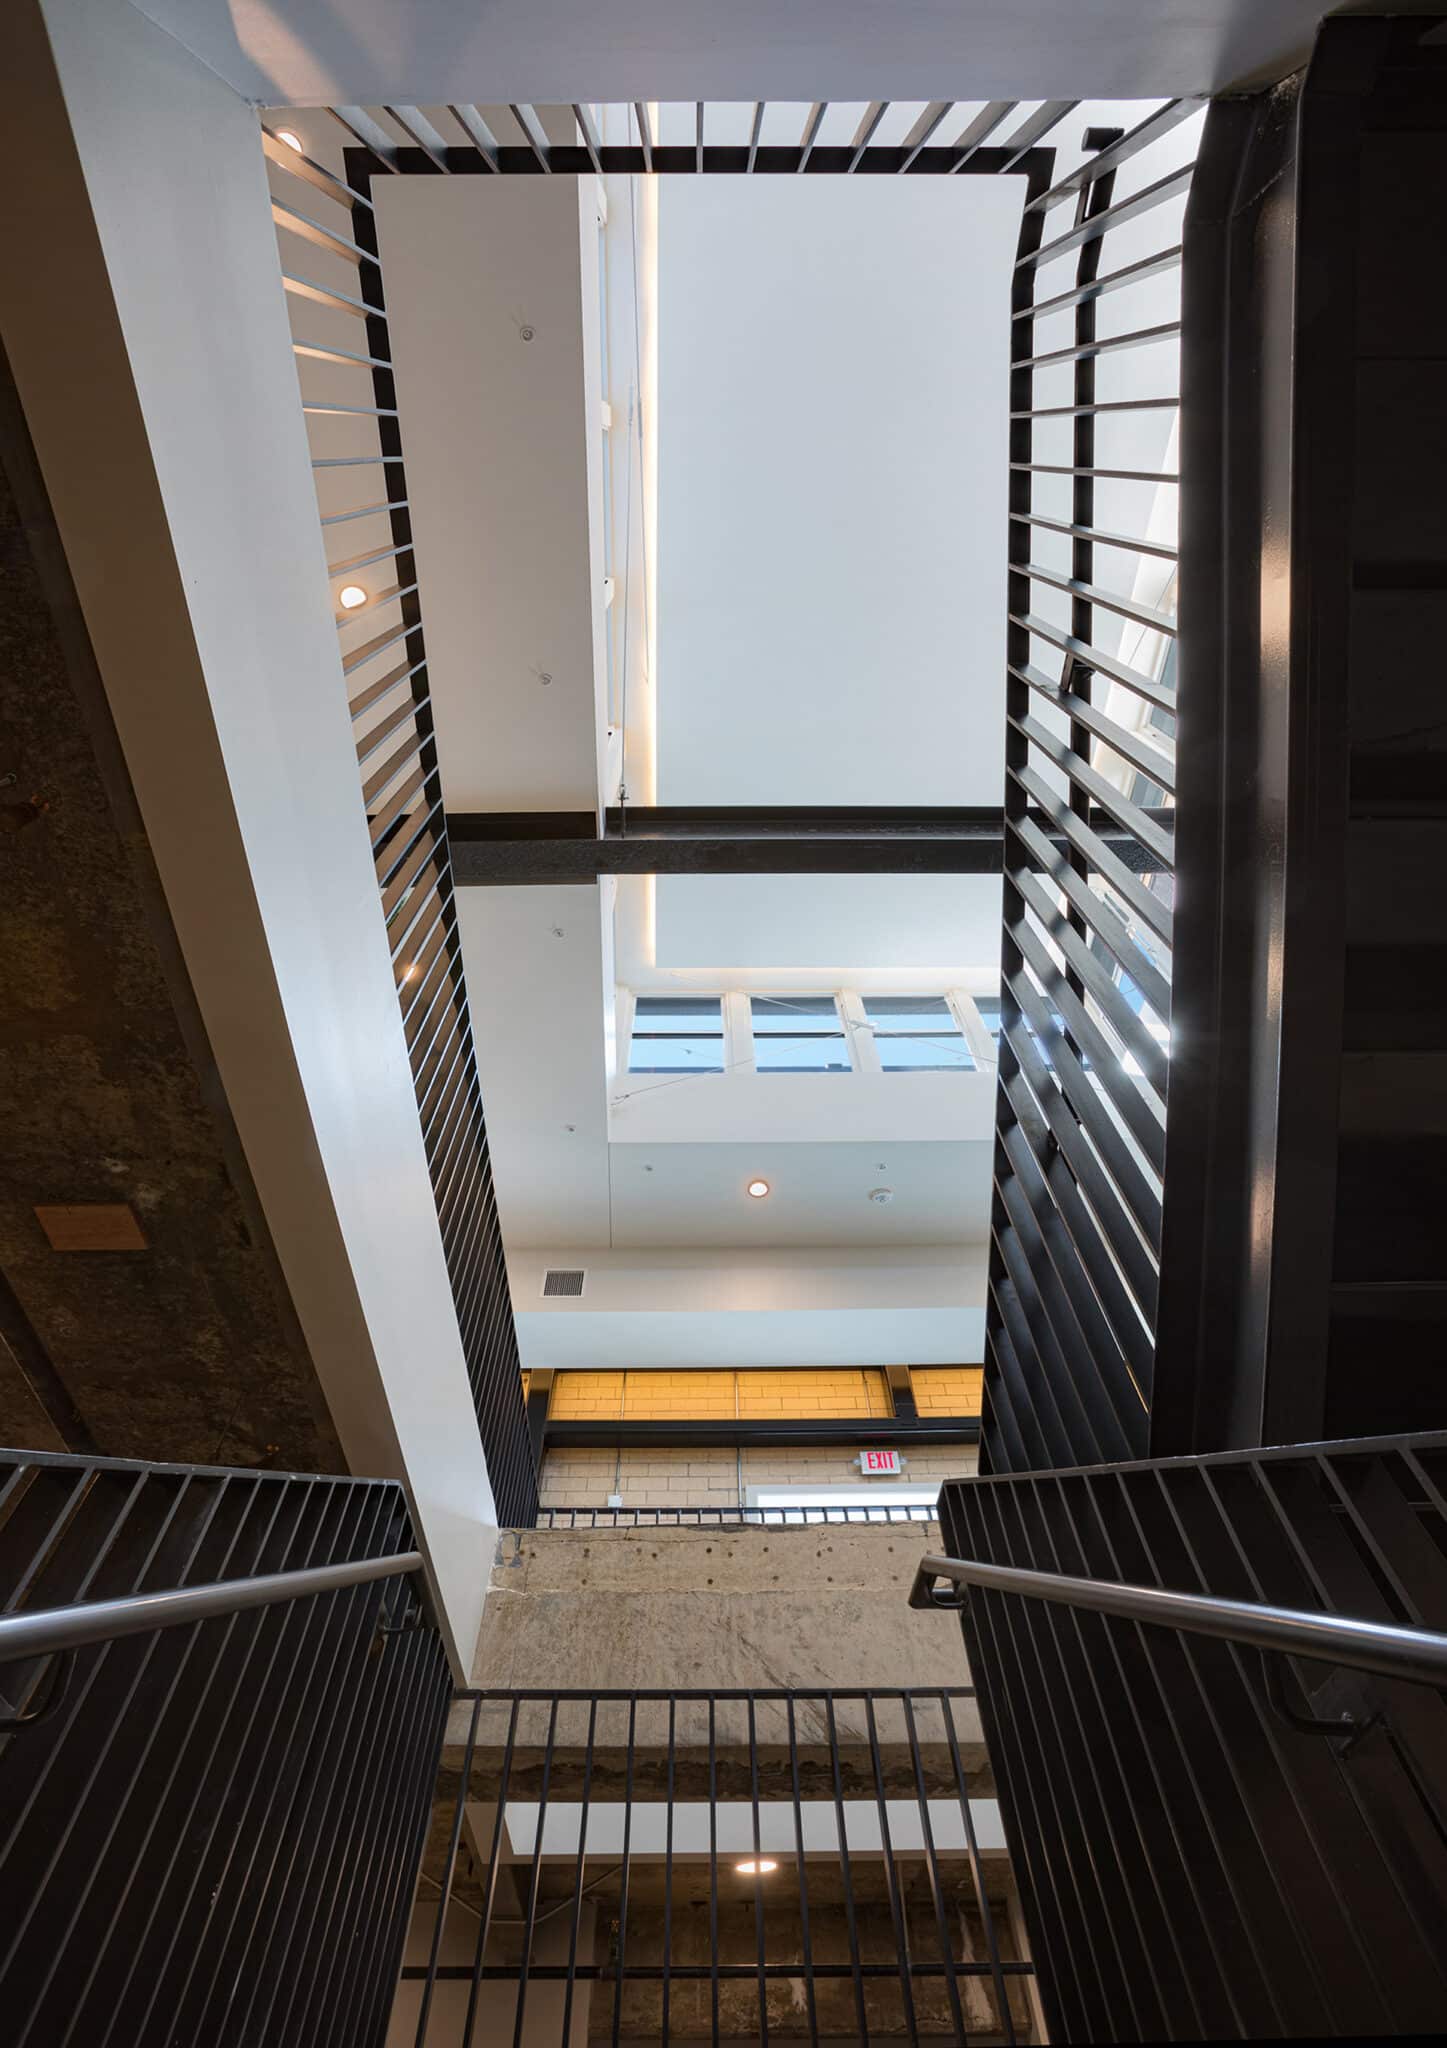 The Georgian Condo Stairs & Ceiling Designed by Trivers Architectural Firm